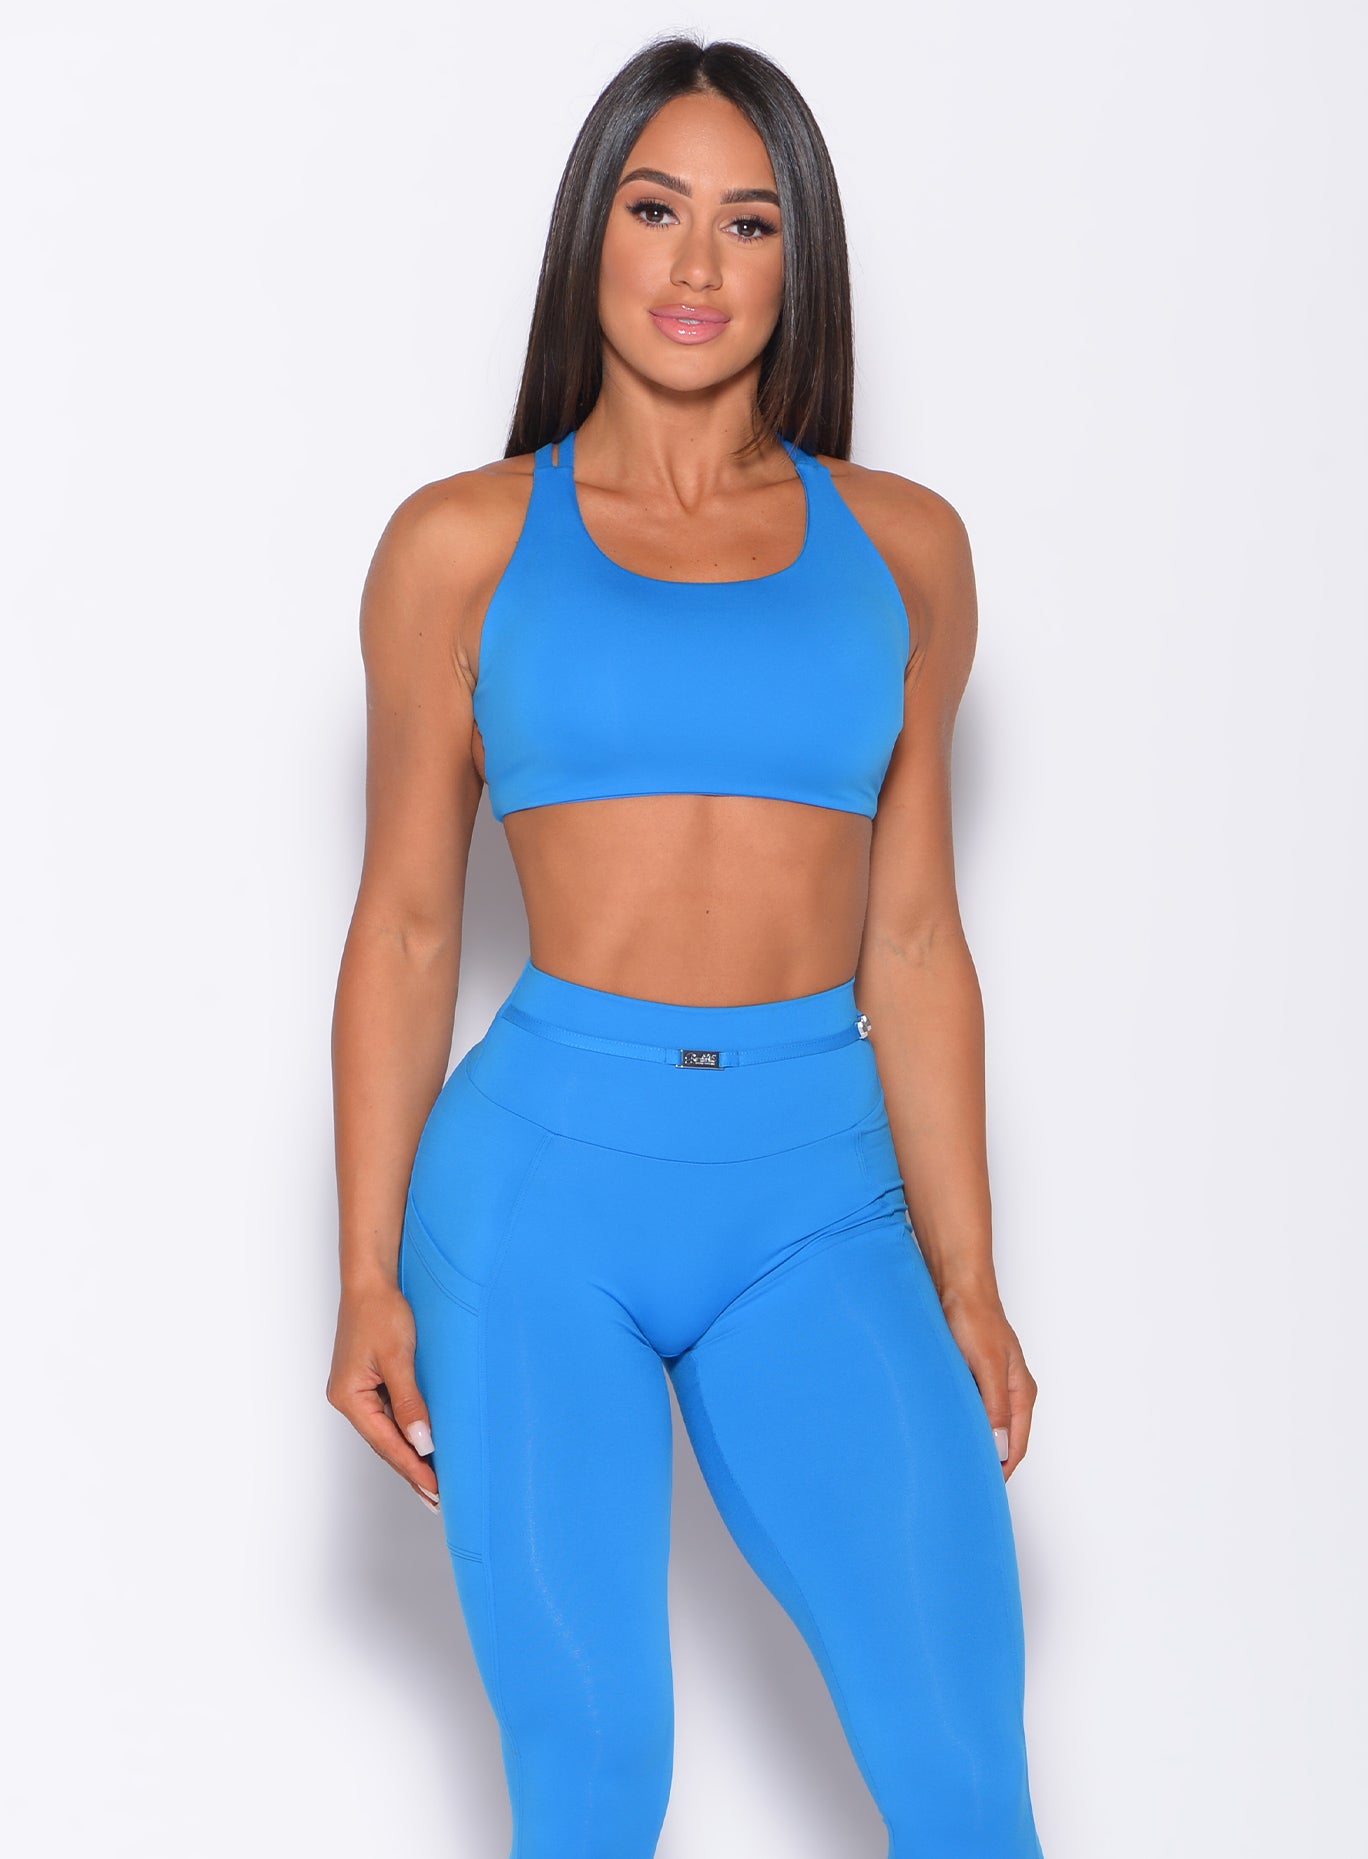 Front profile view of a model in our barbell sports bra in crystal pop blue color and a matching leggings